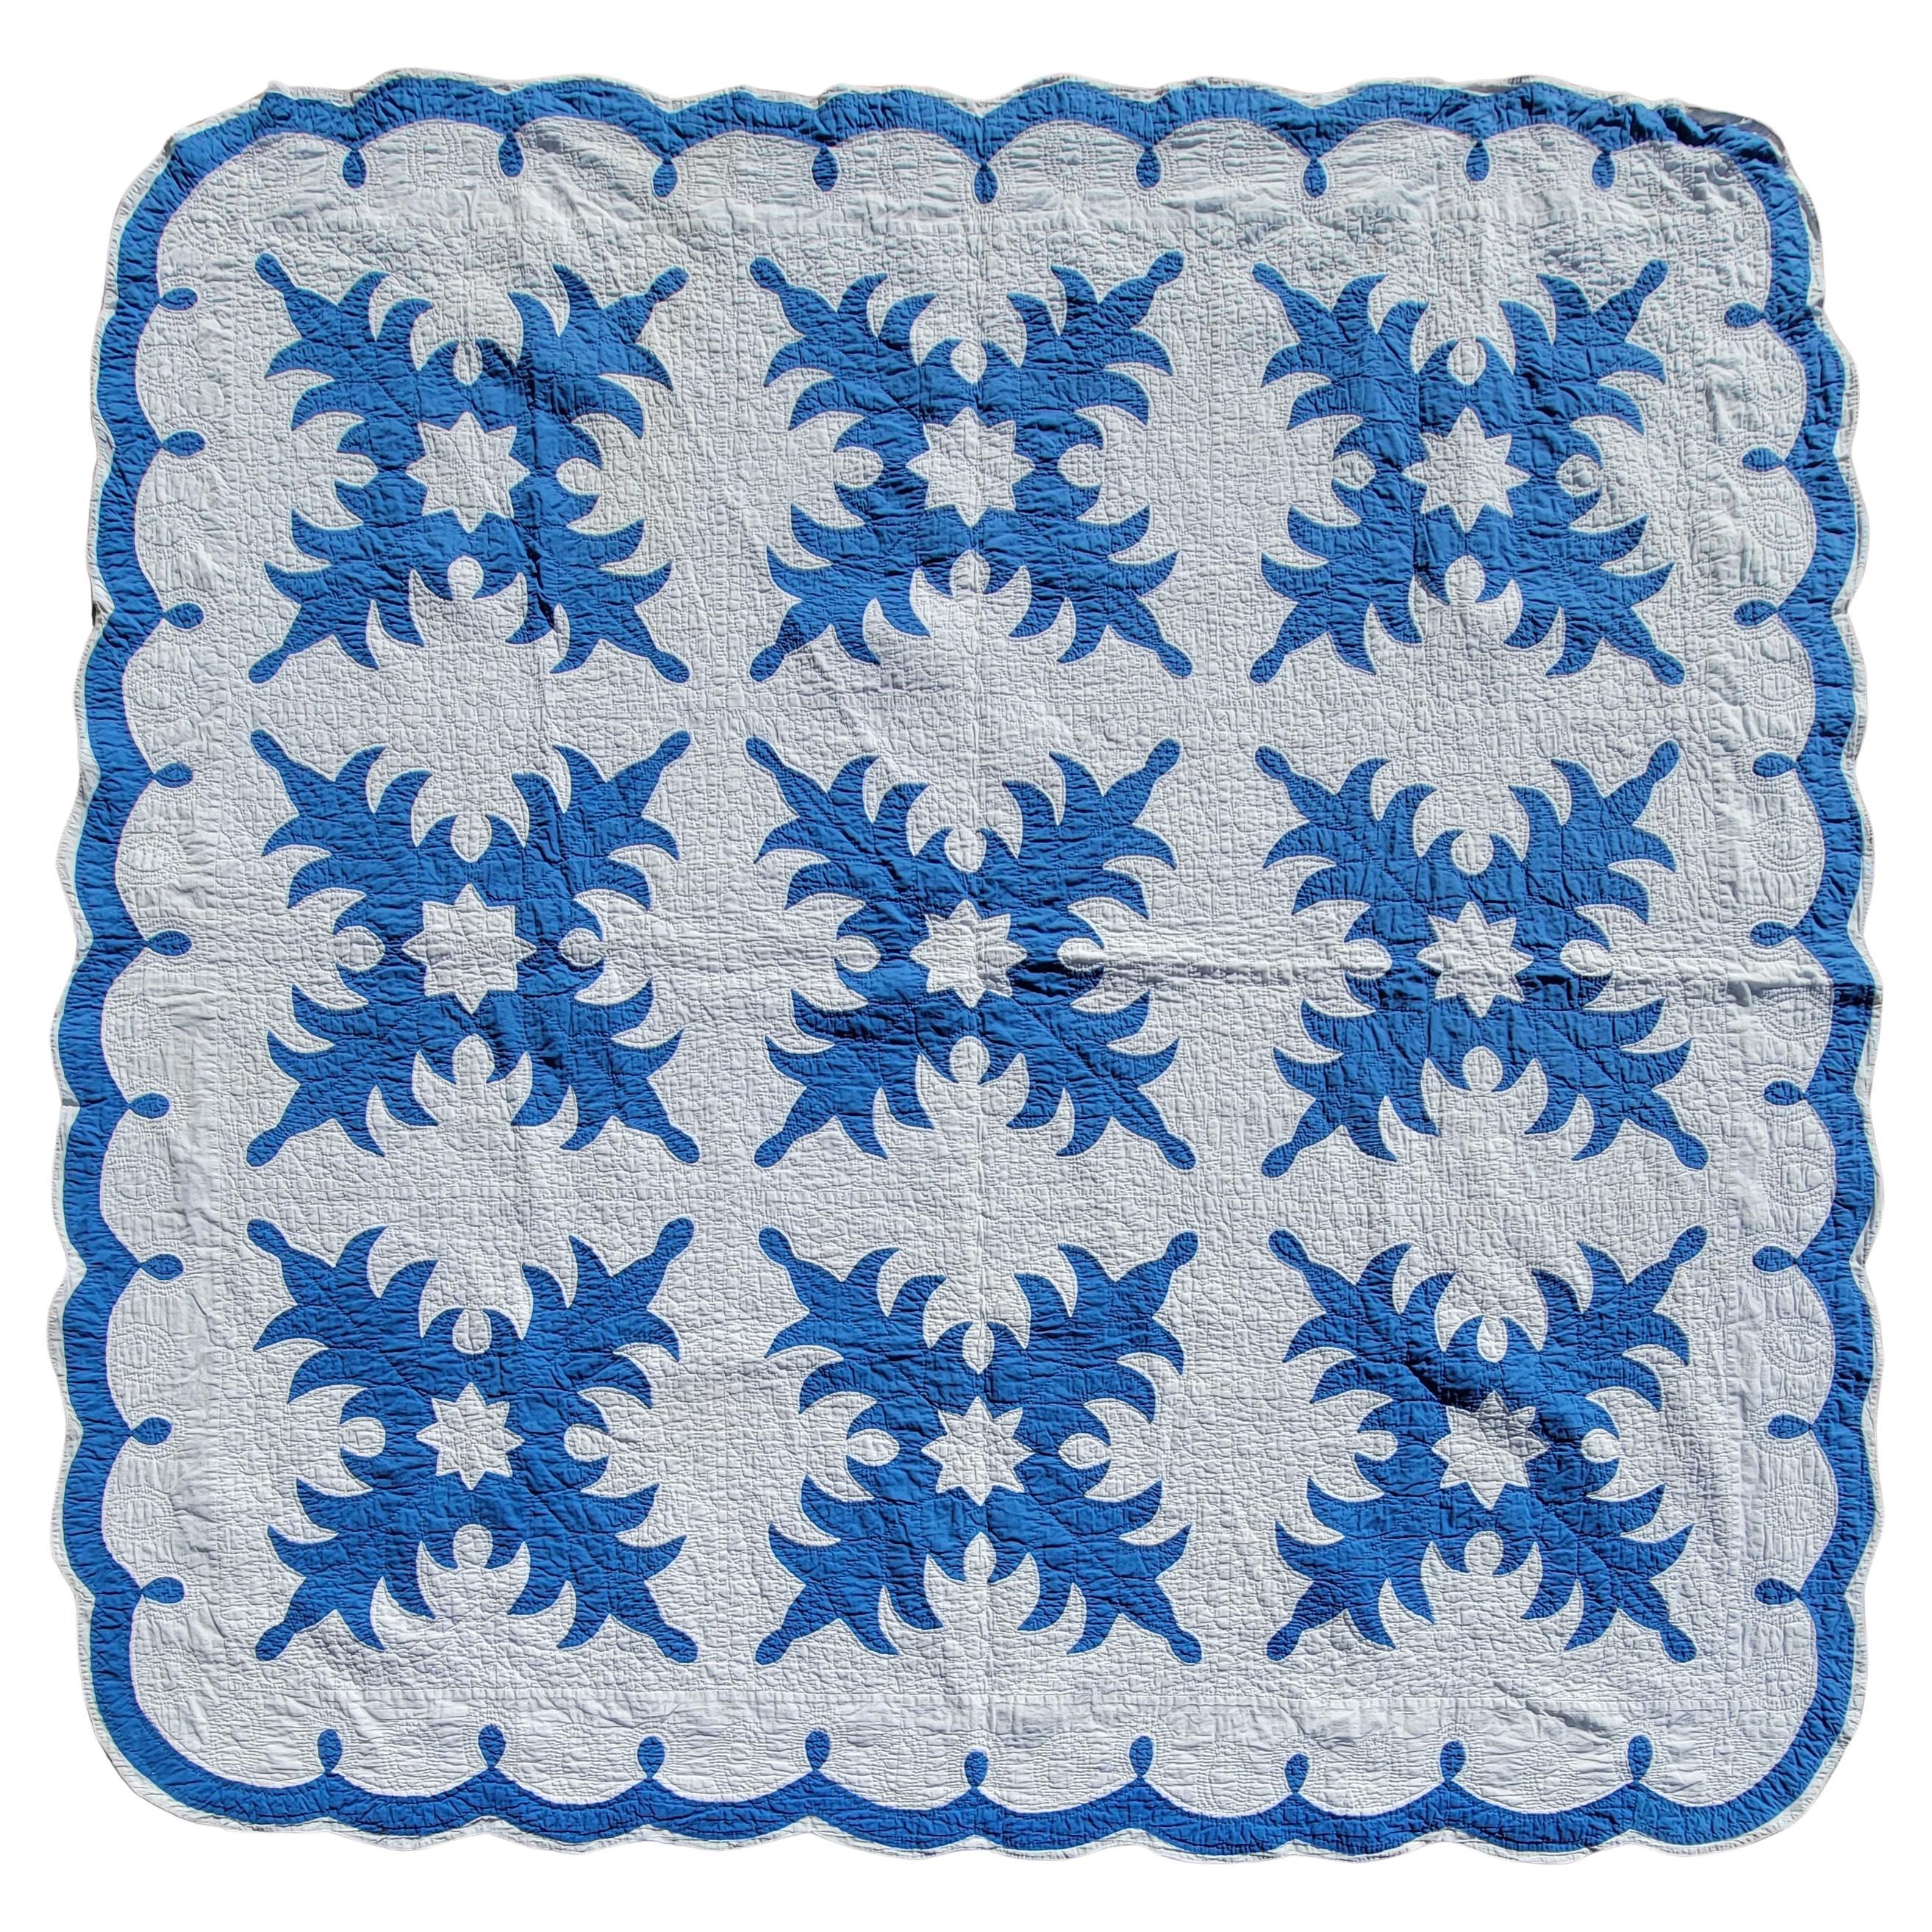 Early 20Thc Blue & White Applique Snow Flake Quilt For Sale